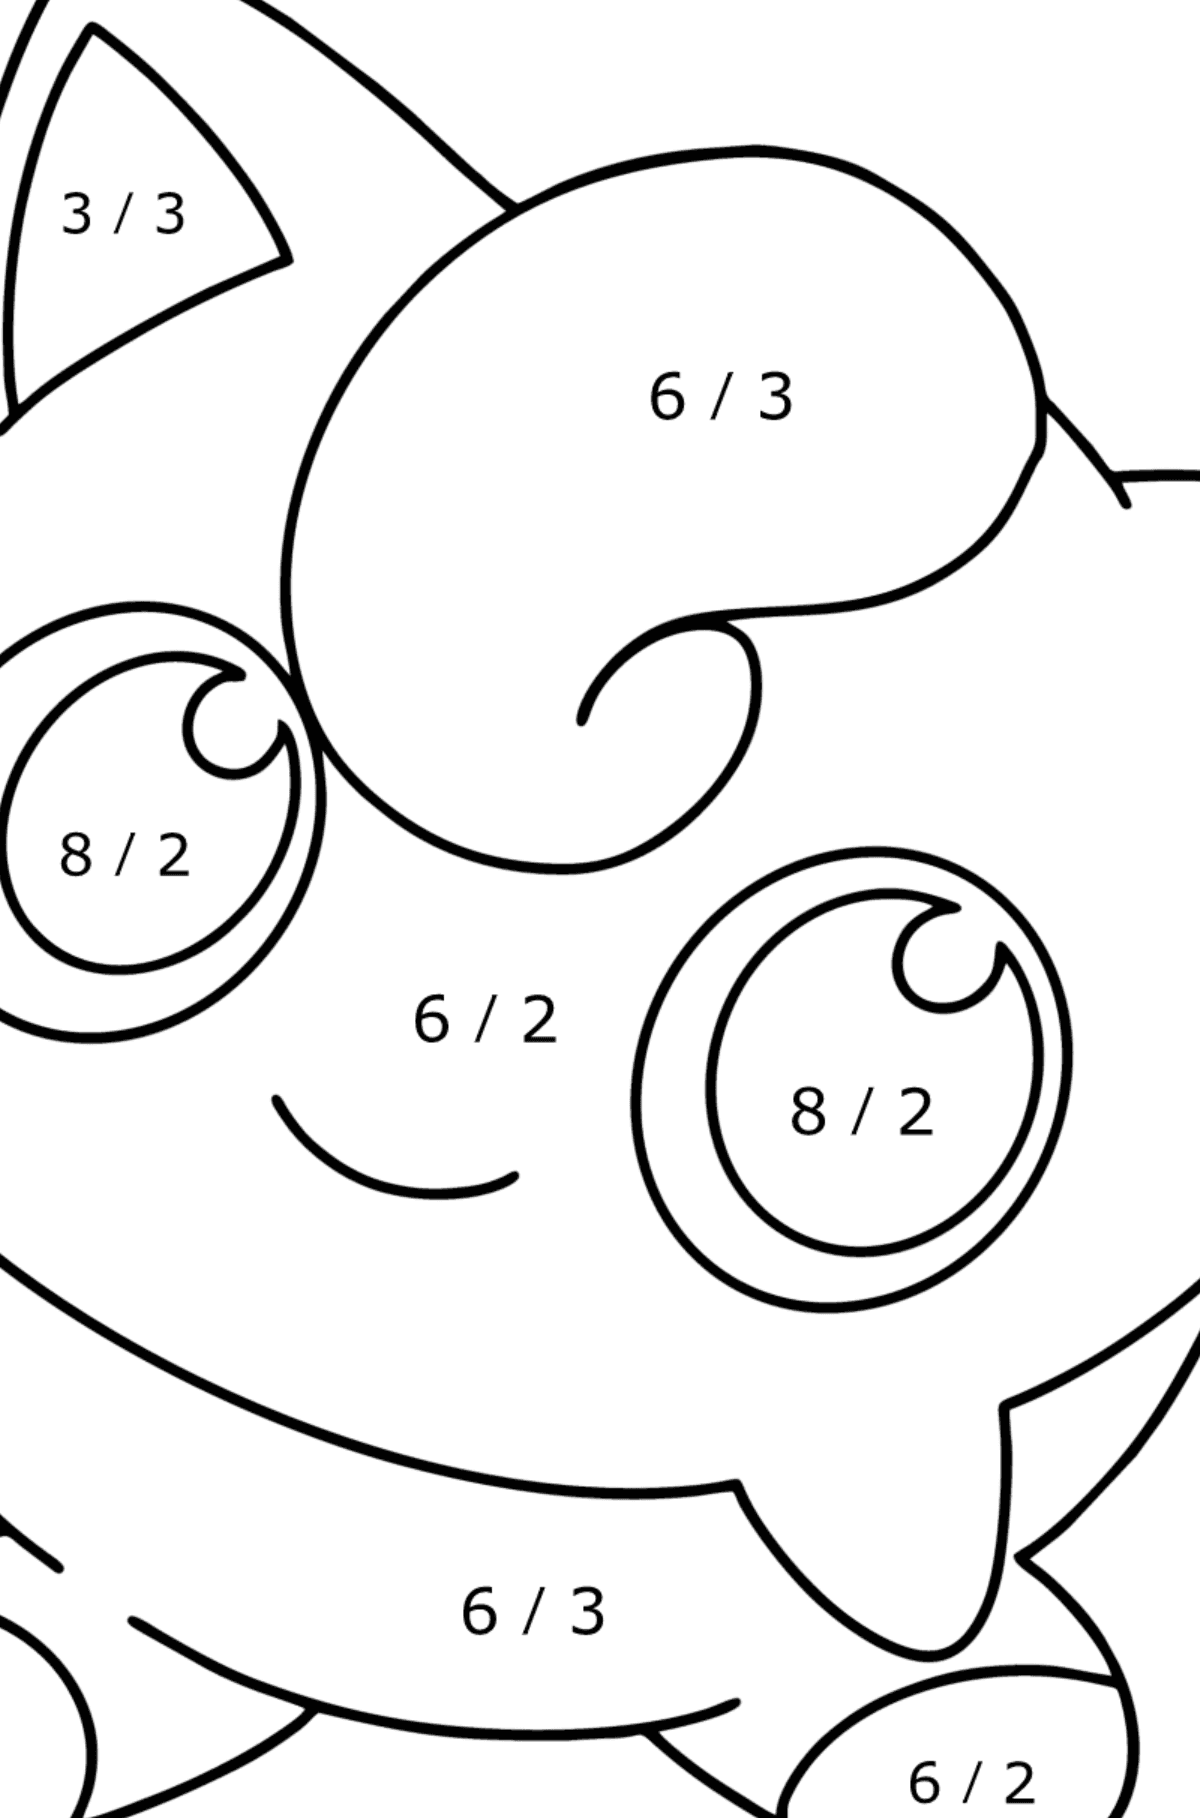 Coloring page Pokémon Go Jigglypuff - Math Coloring - Division for Kids